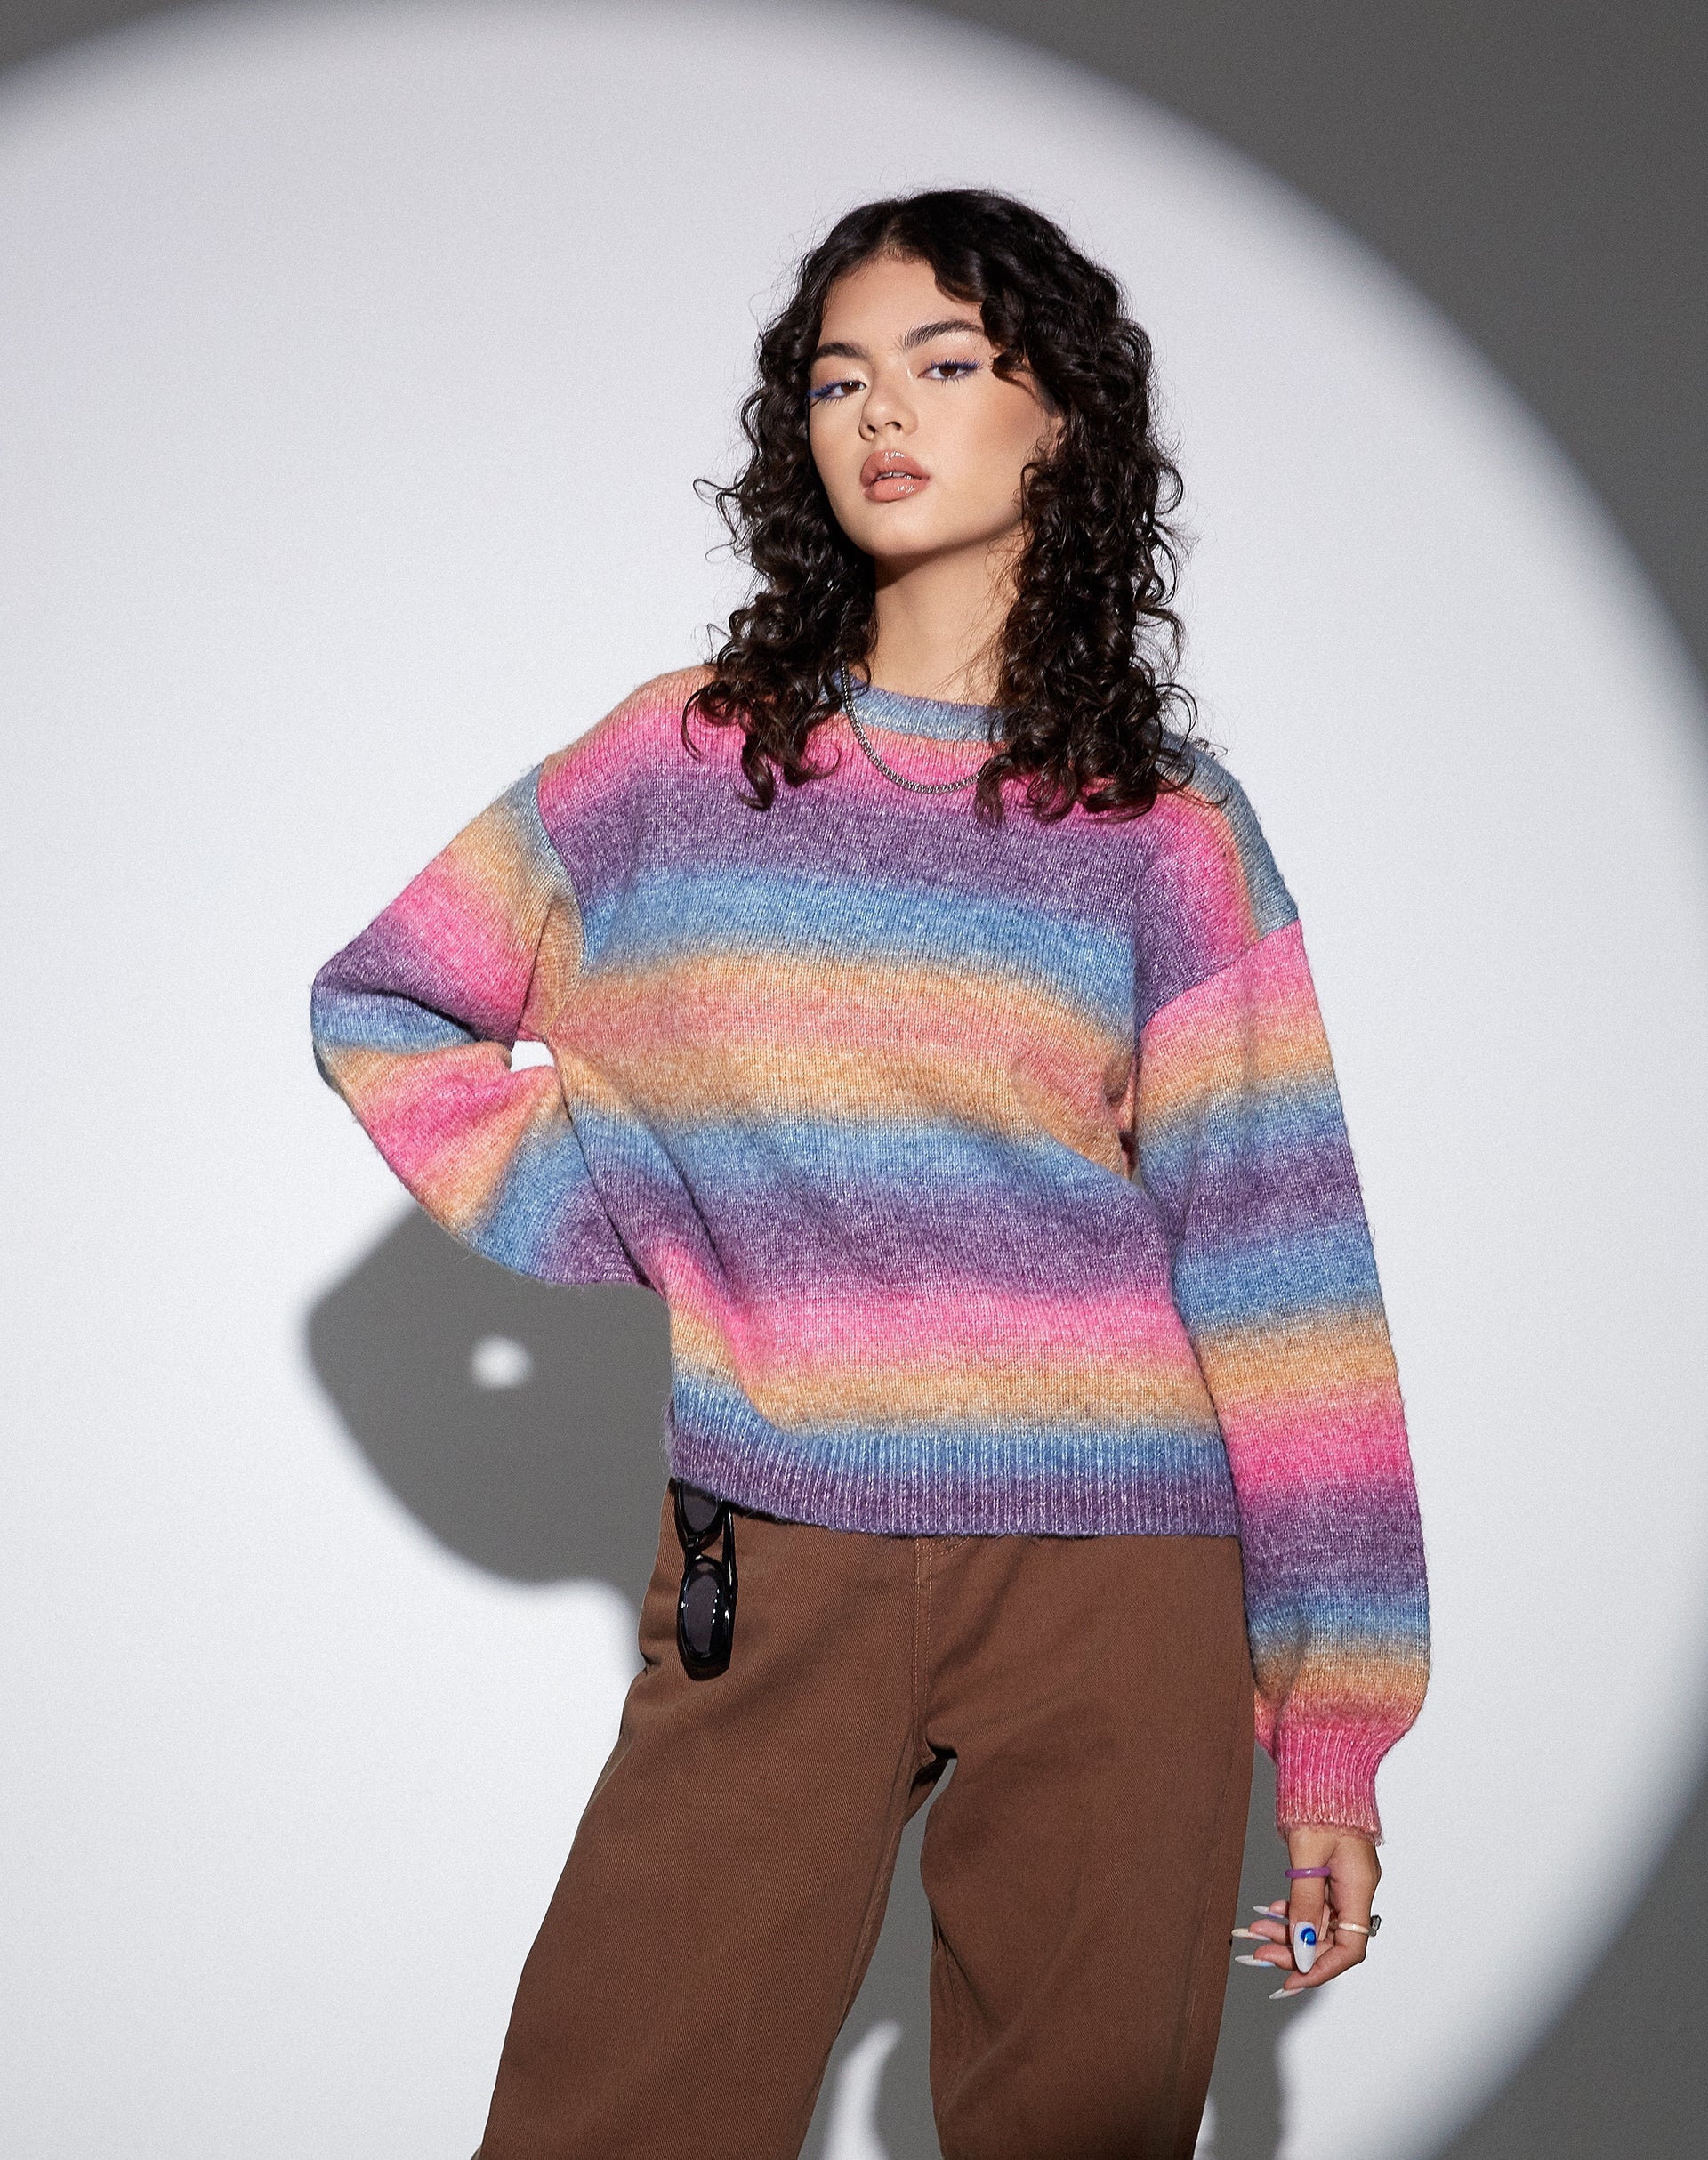 Image of MOTEL X OLIVIA NEILL Ammaria Jumper in Pink and Purple